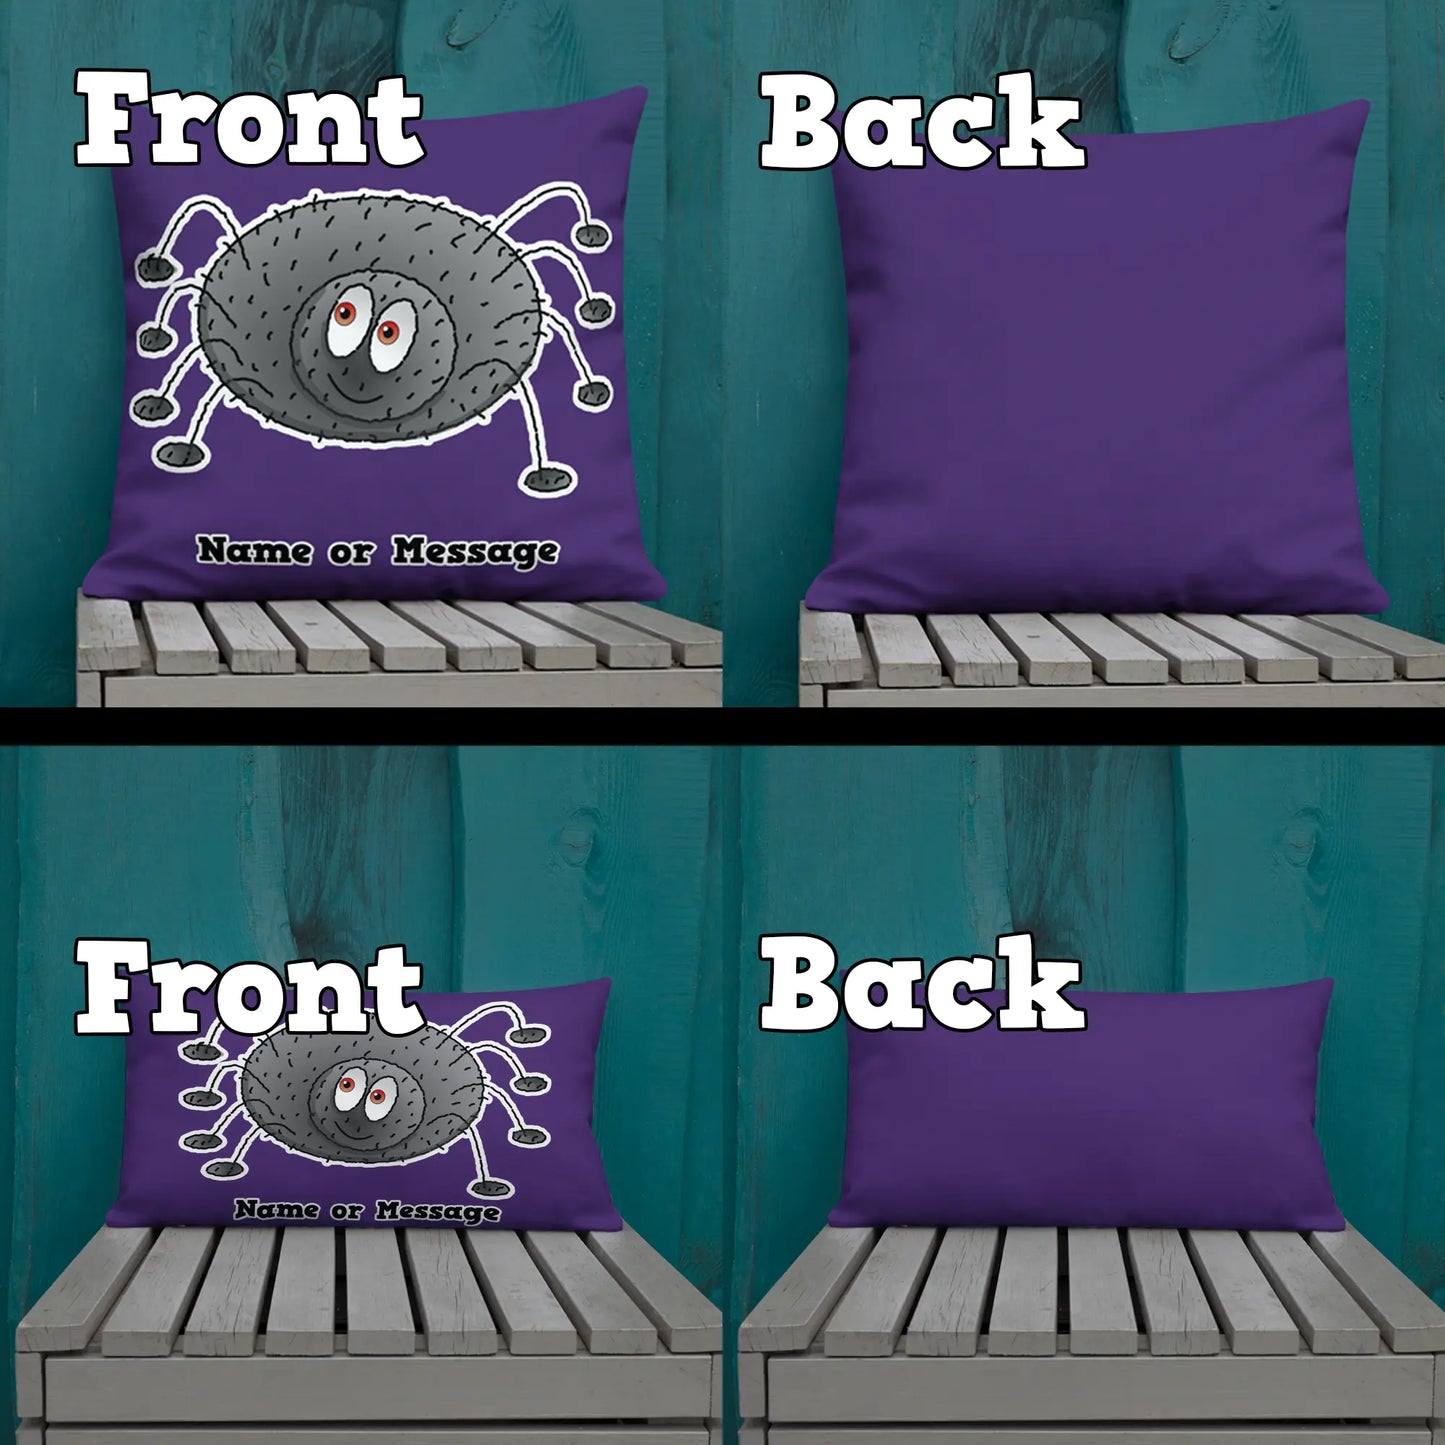 Purple Spider Pillow Cushion, Personalized P005